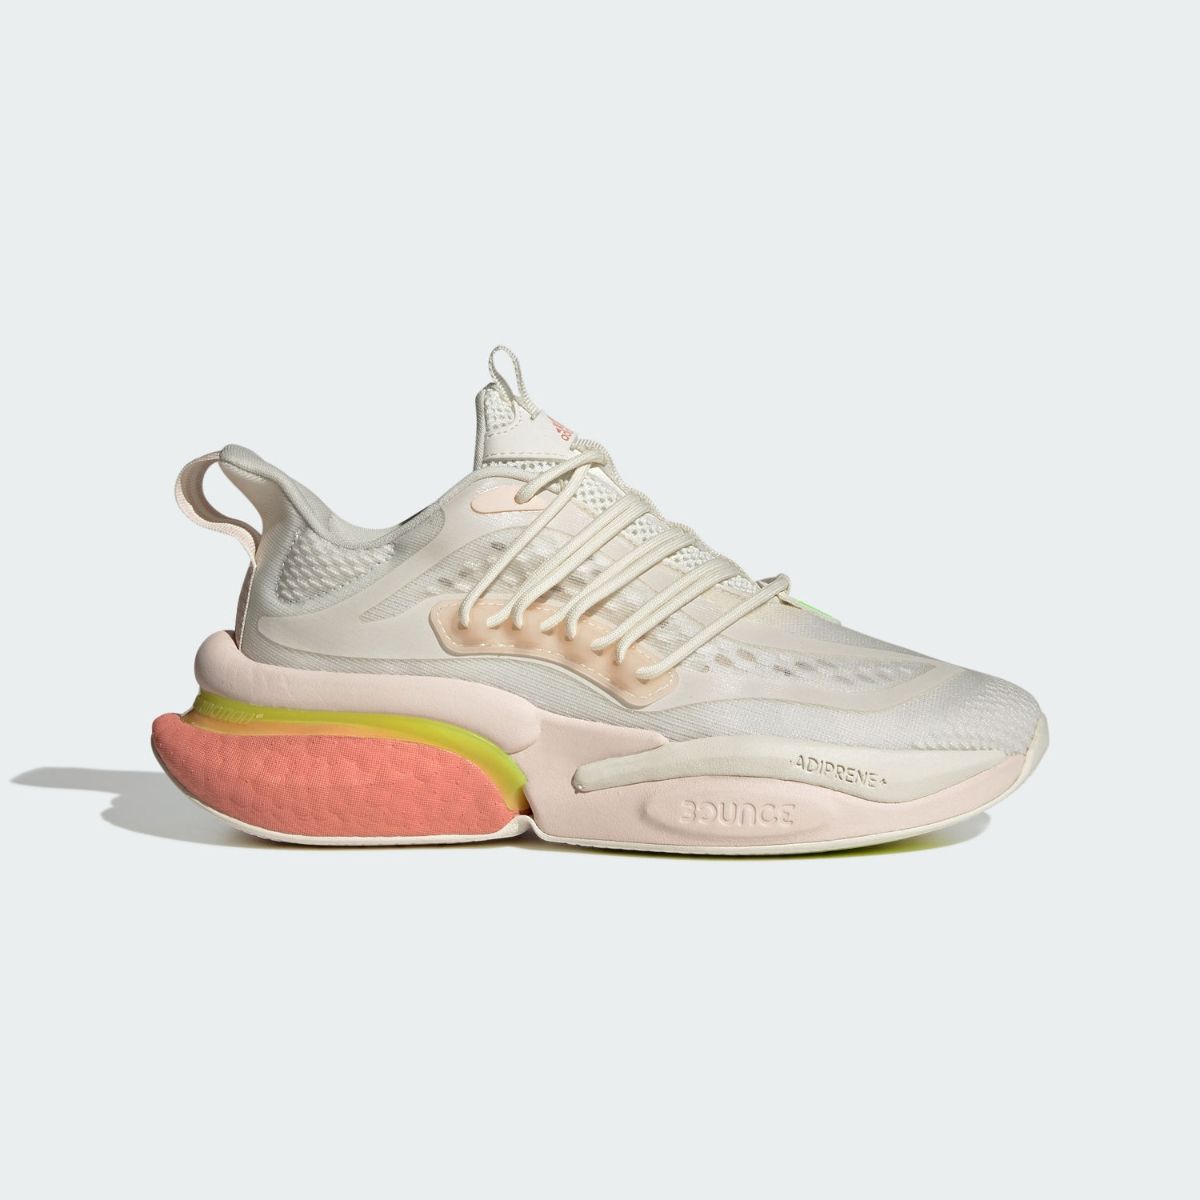 adidas Alphaboost V1 Women Off White Running Shoes: Buy adidas ...